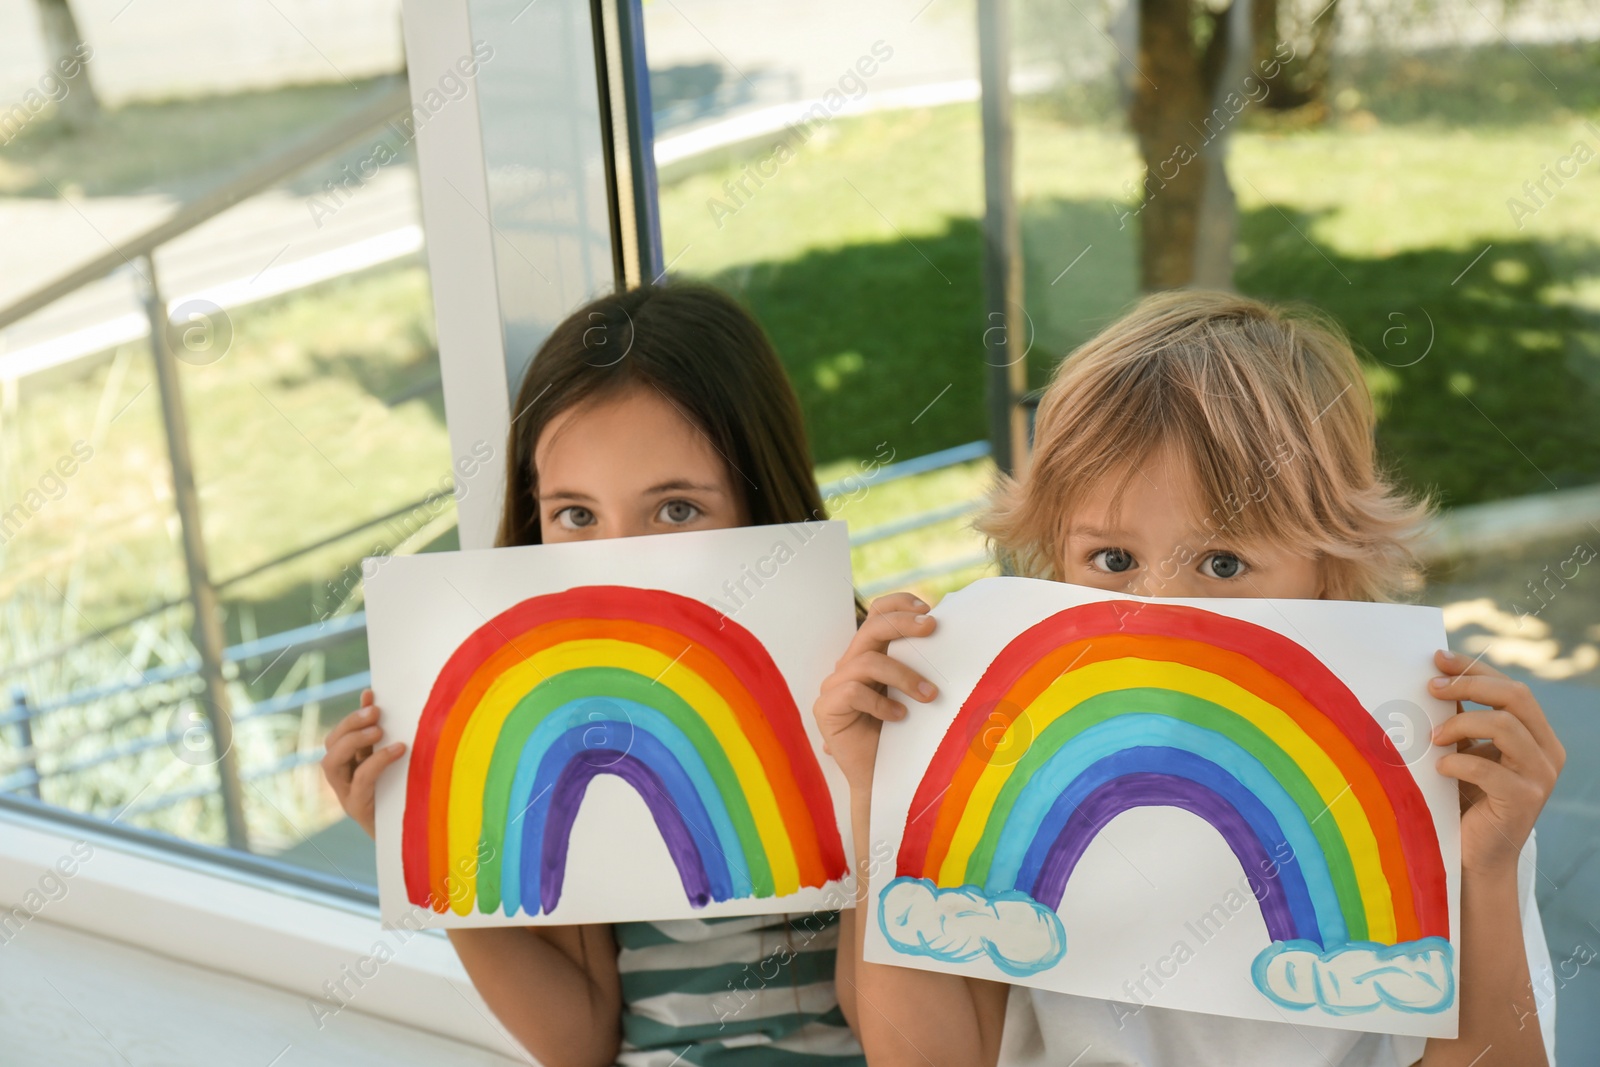 Photo of Little children holding rainbow paintings near window indoors. Stay at home concept